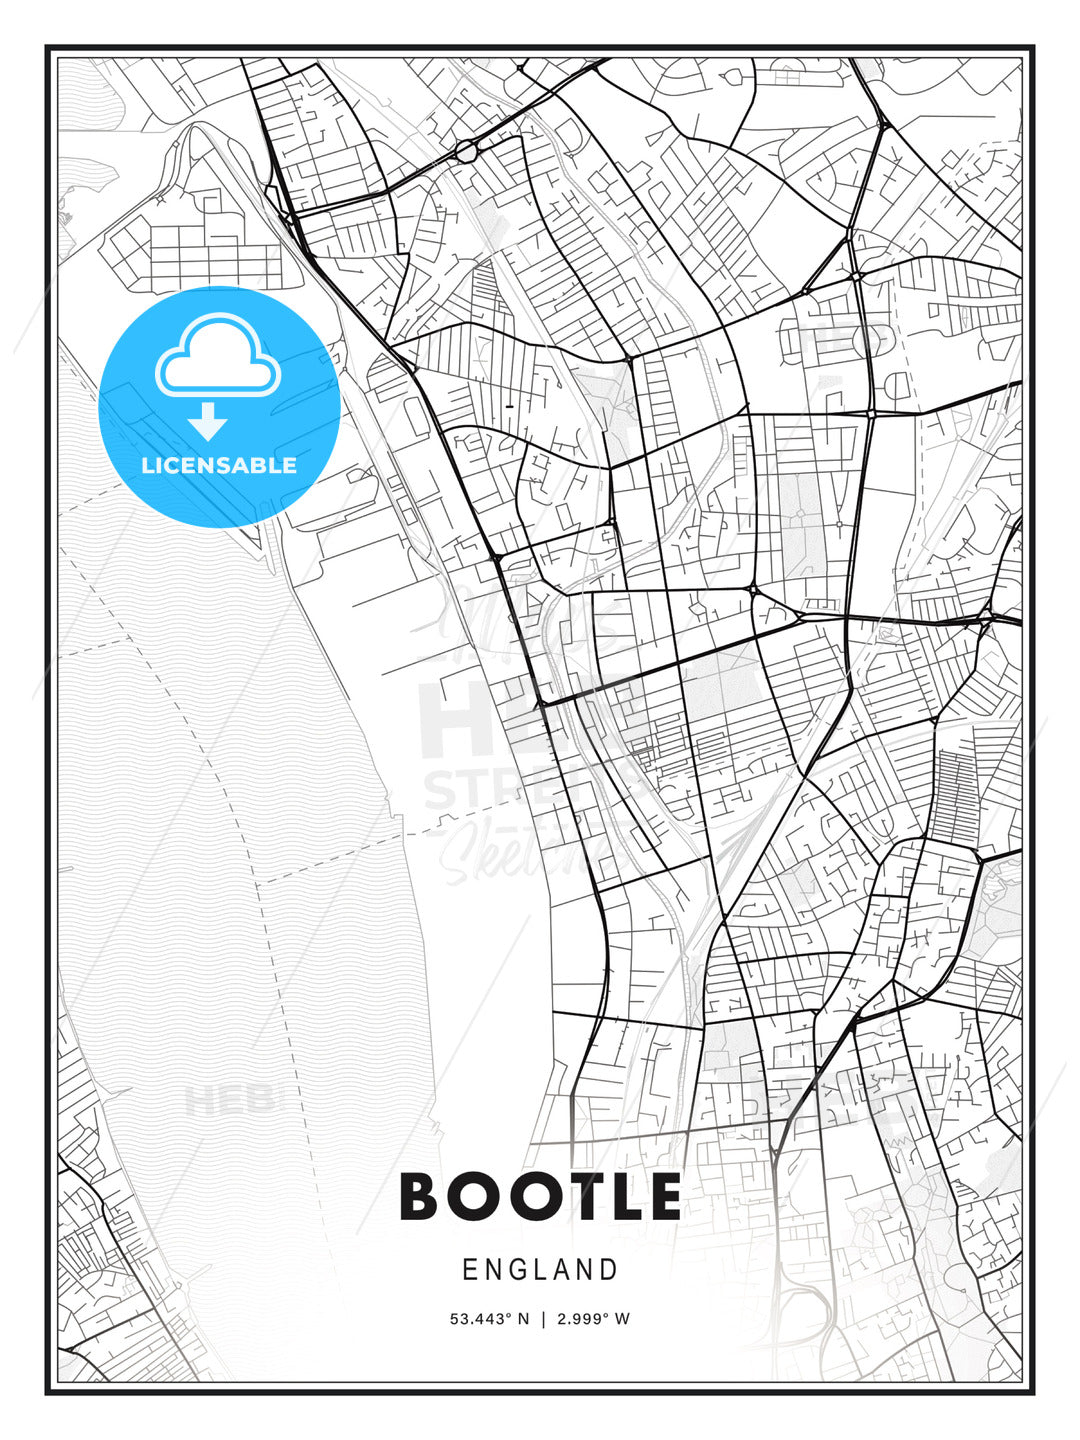 Bootle, England, Modern Print Template in Various Formats - HEBSTREITS Sketches